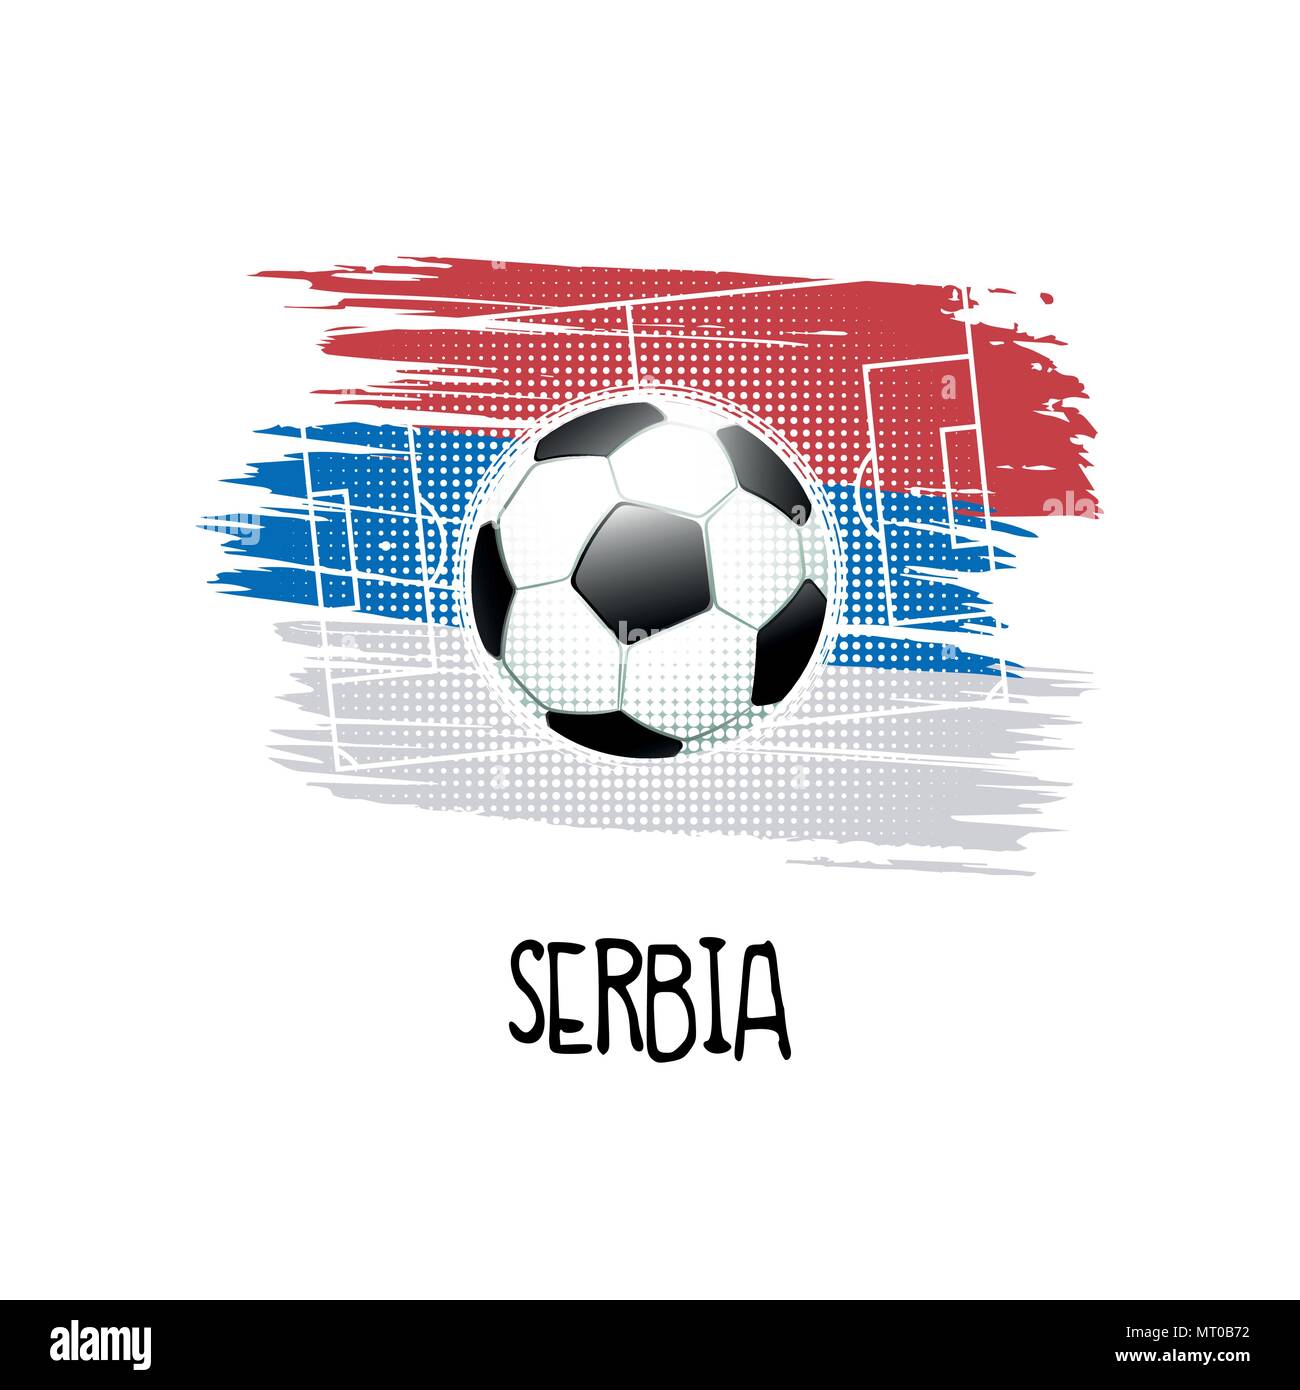 Hand written word 'Serbia' with soccer ball, soccer field and abstract colors of the Serbian flag. Vector illustration. Stock Vector